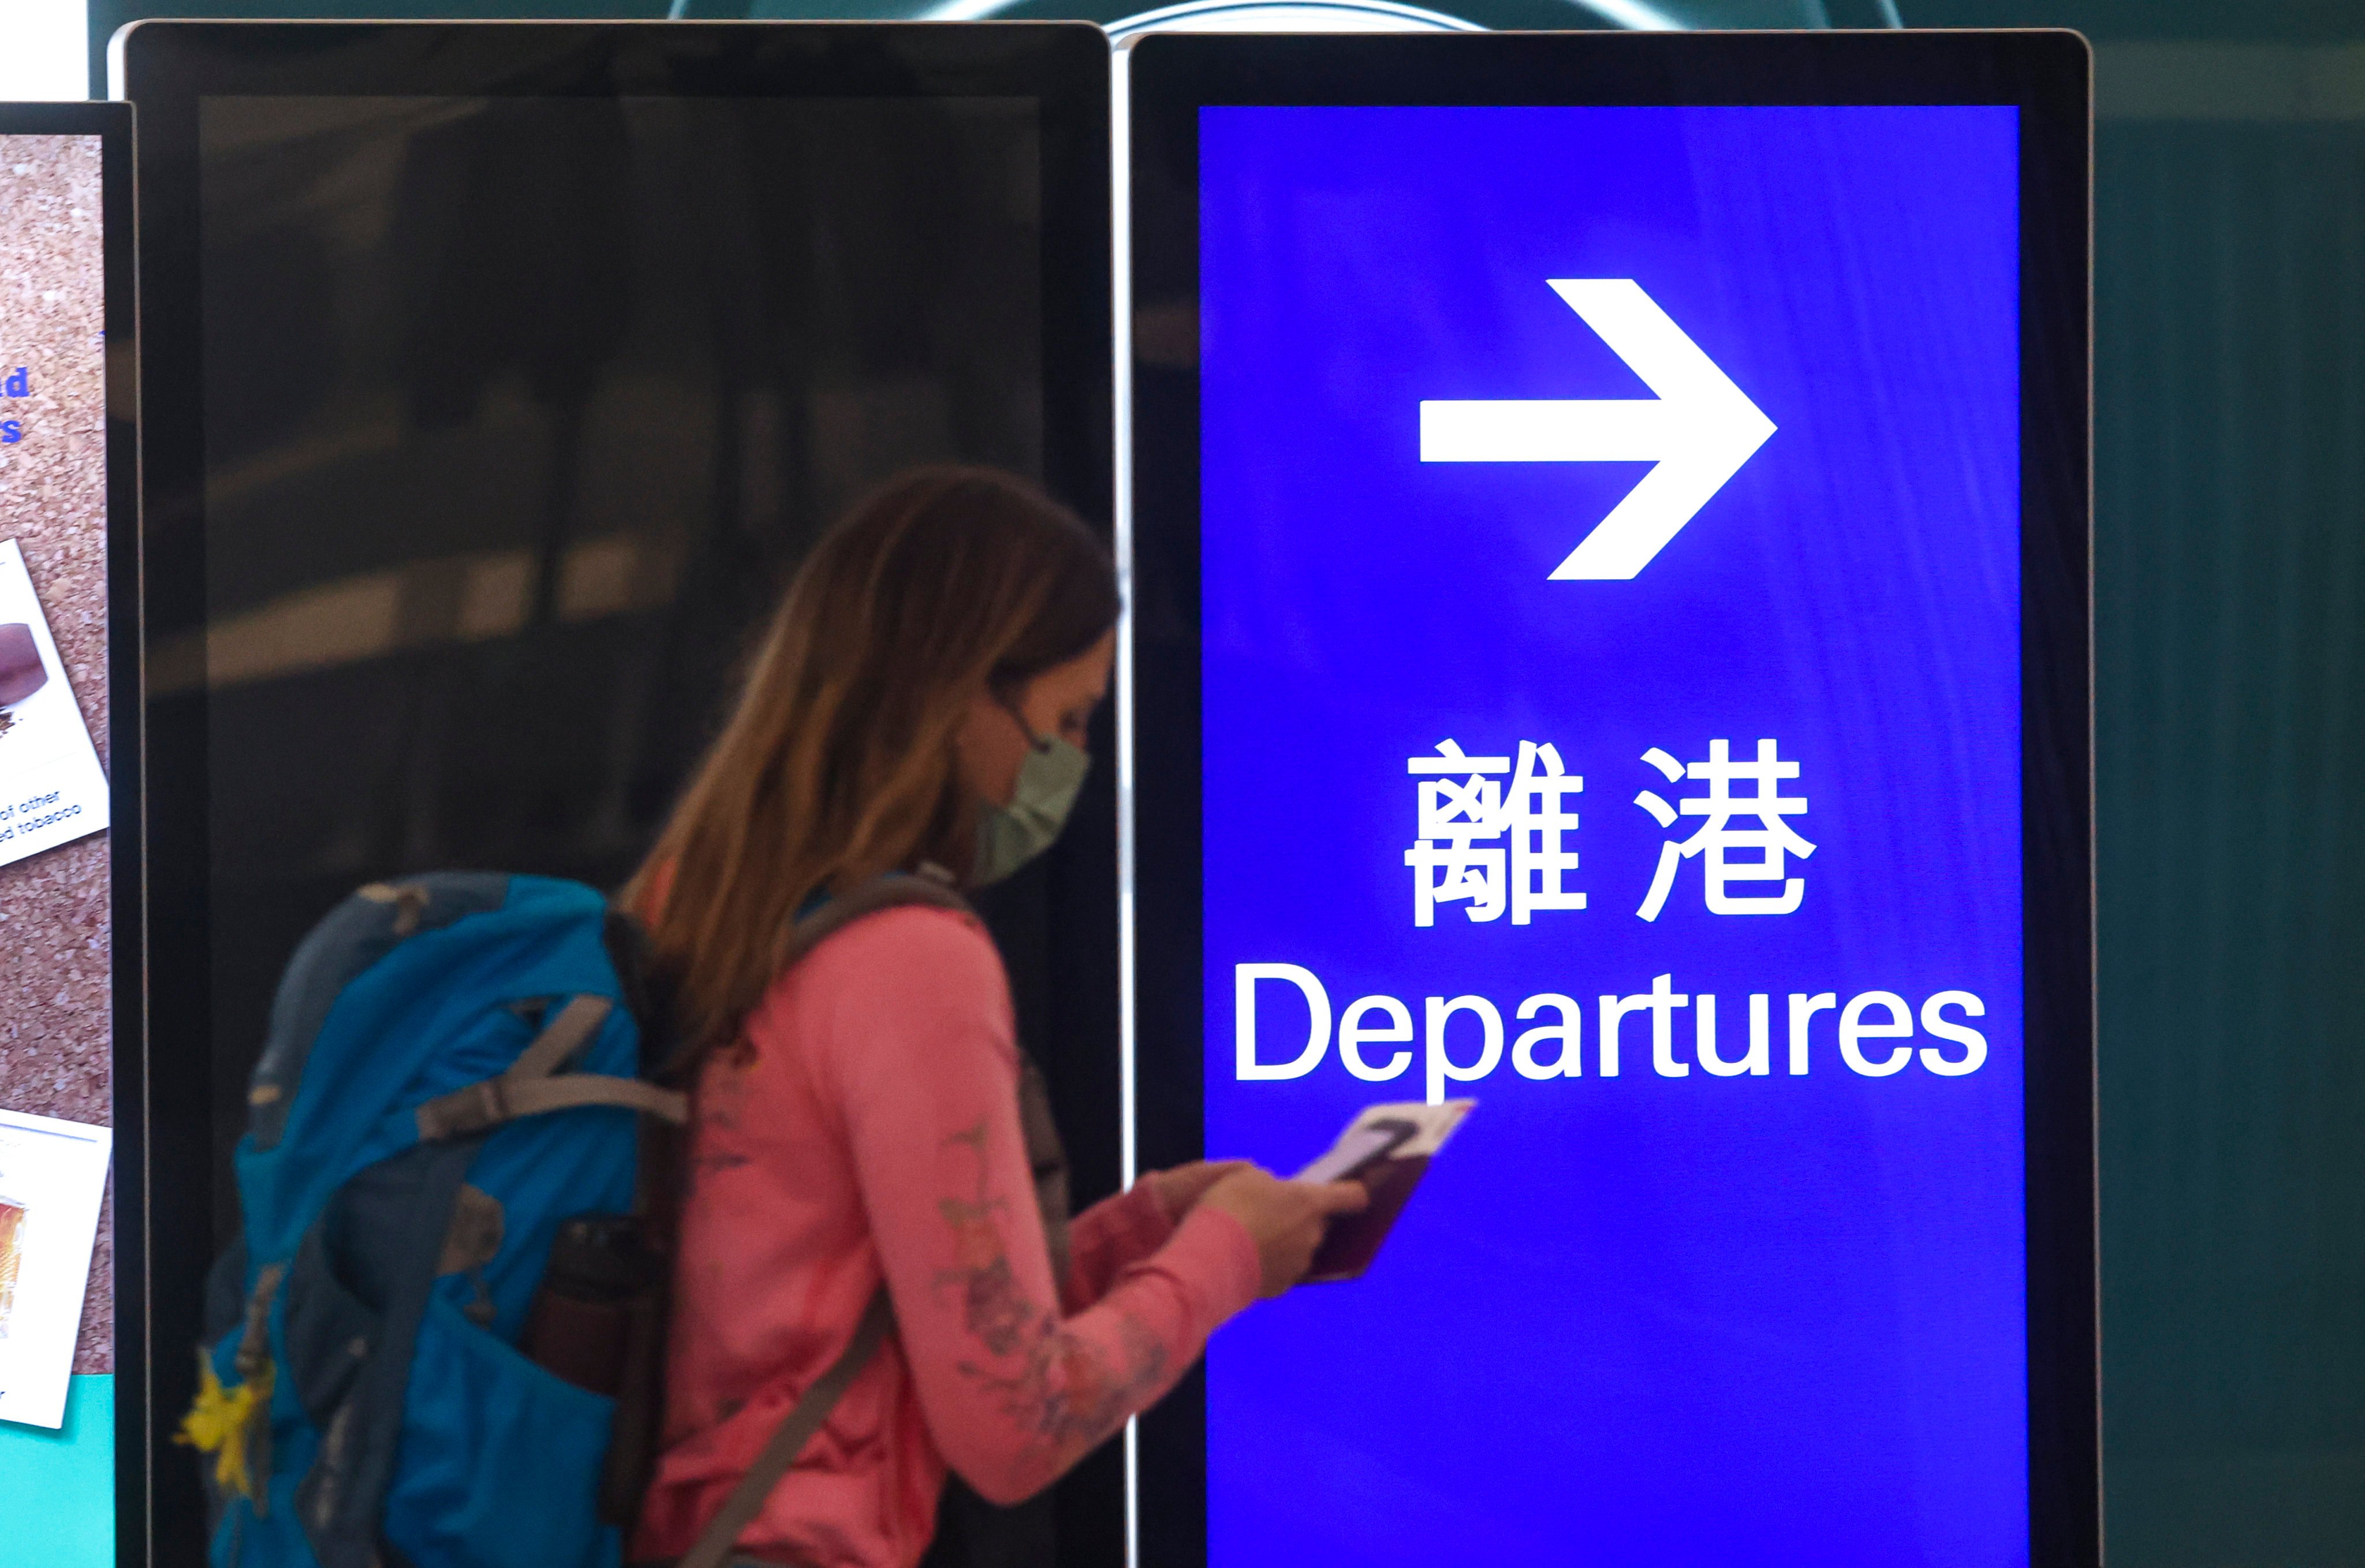 Departing passengers at Hong Kong’s airport or those in transit could continue paying airport construction fees. Photo: K. Y. Cheng